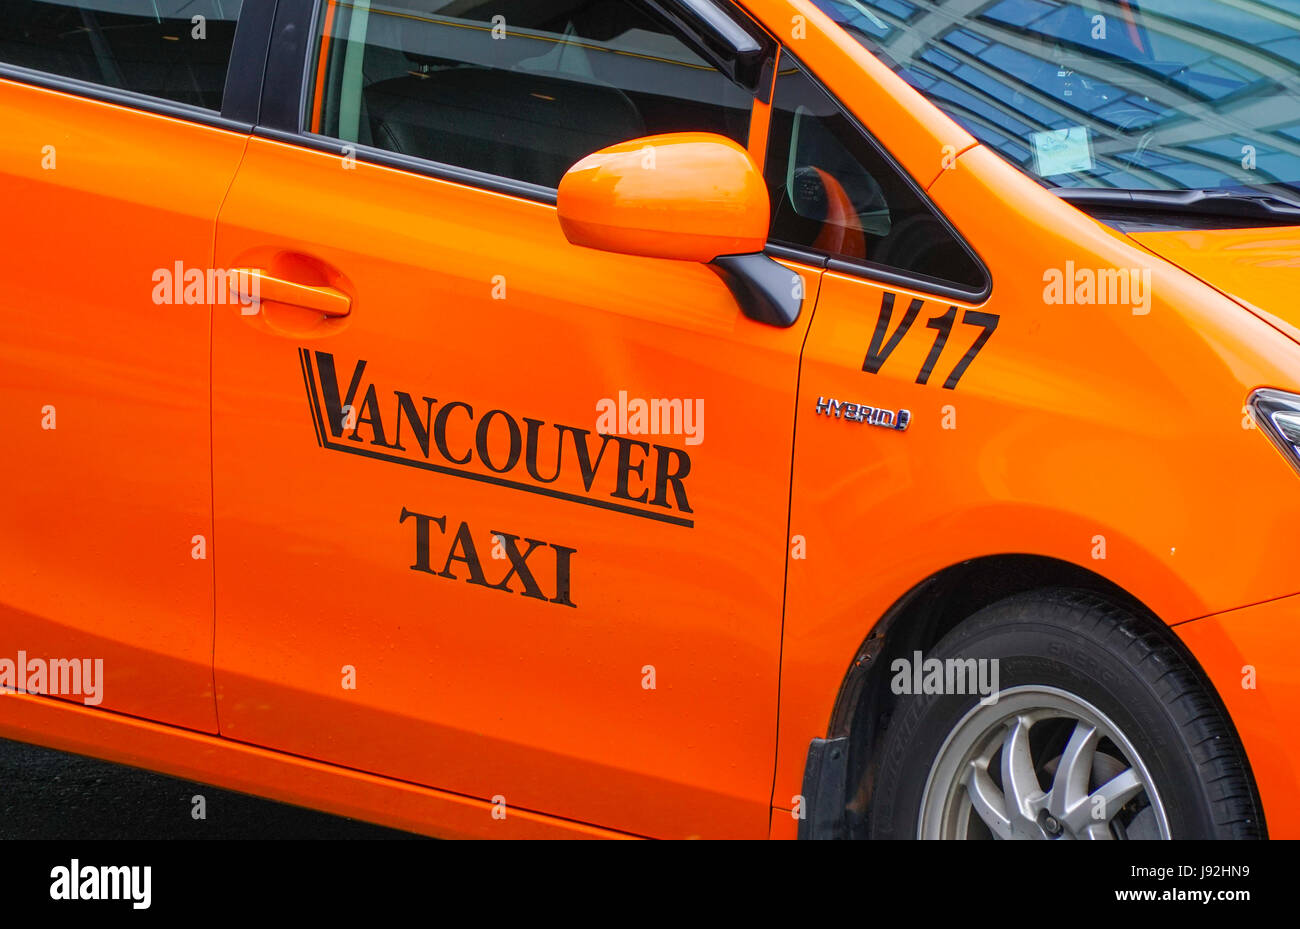 are dogs allowed in taxis vancouver